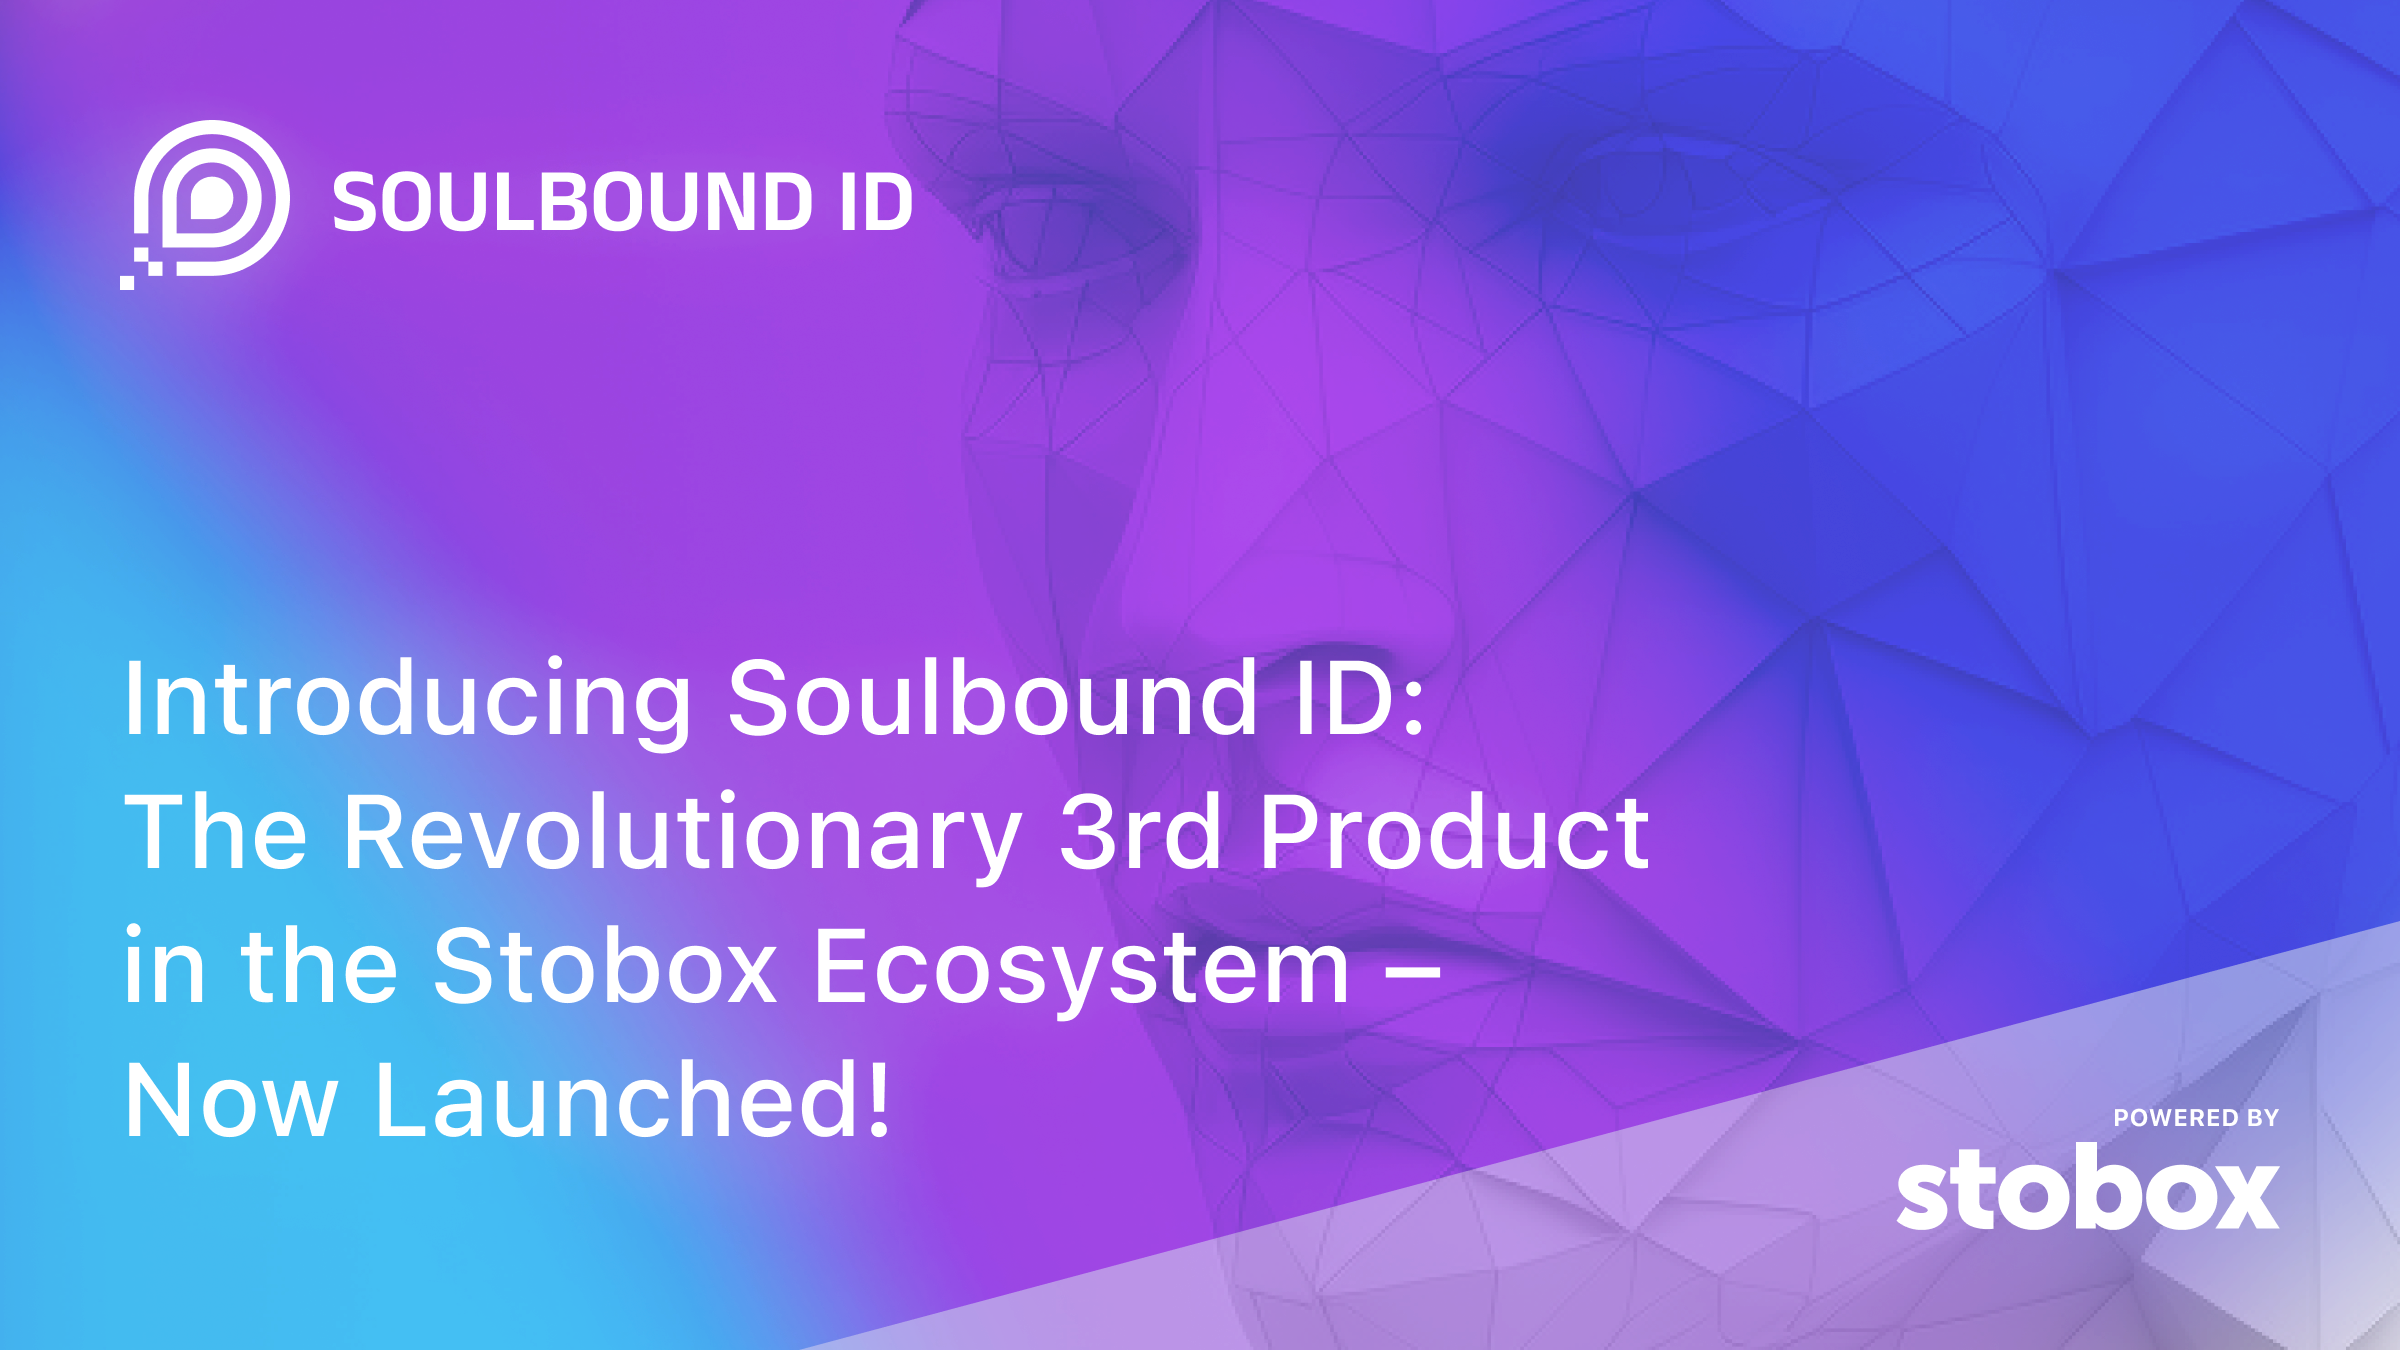 Introducing Soulbound ID: The Revolutionary 3rd Product in the Stobox Ecosystem – Now Launched!